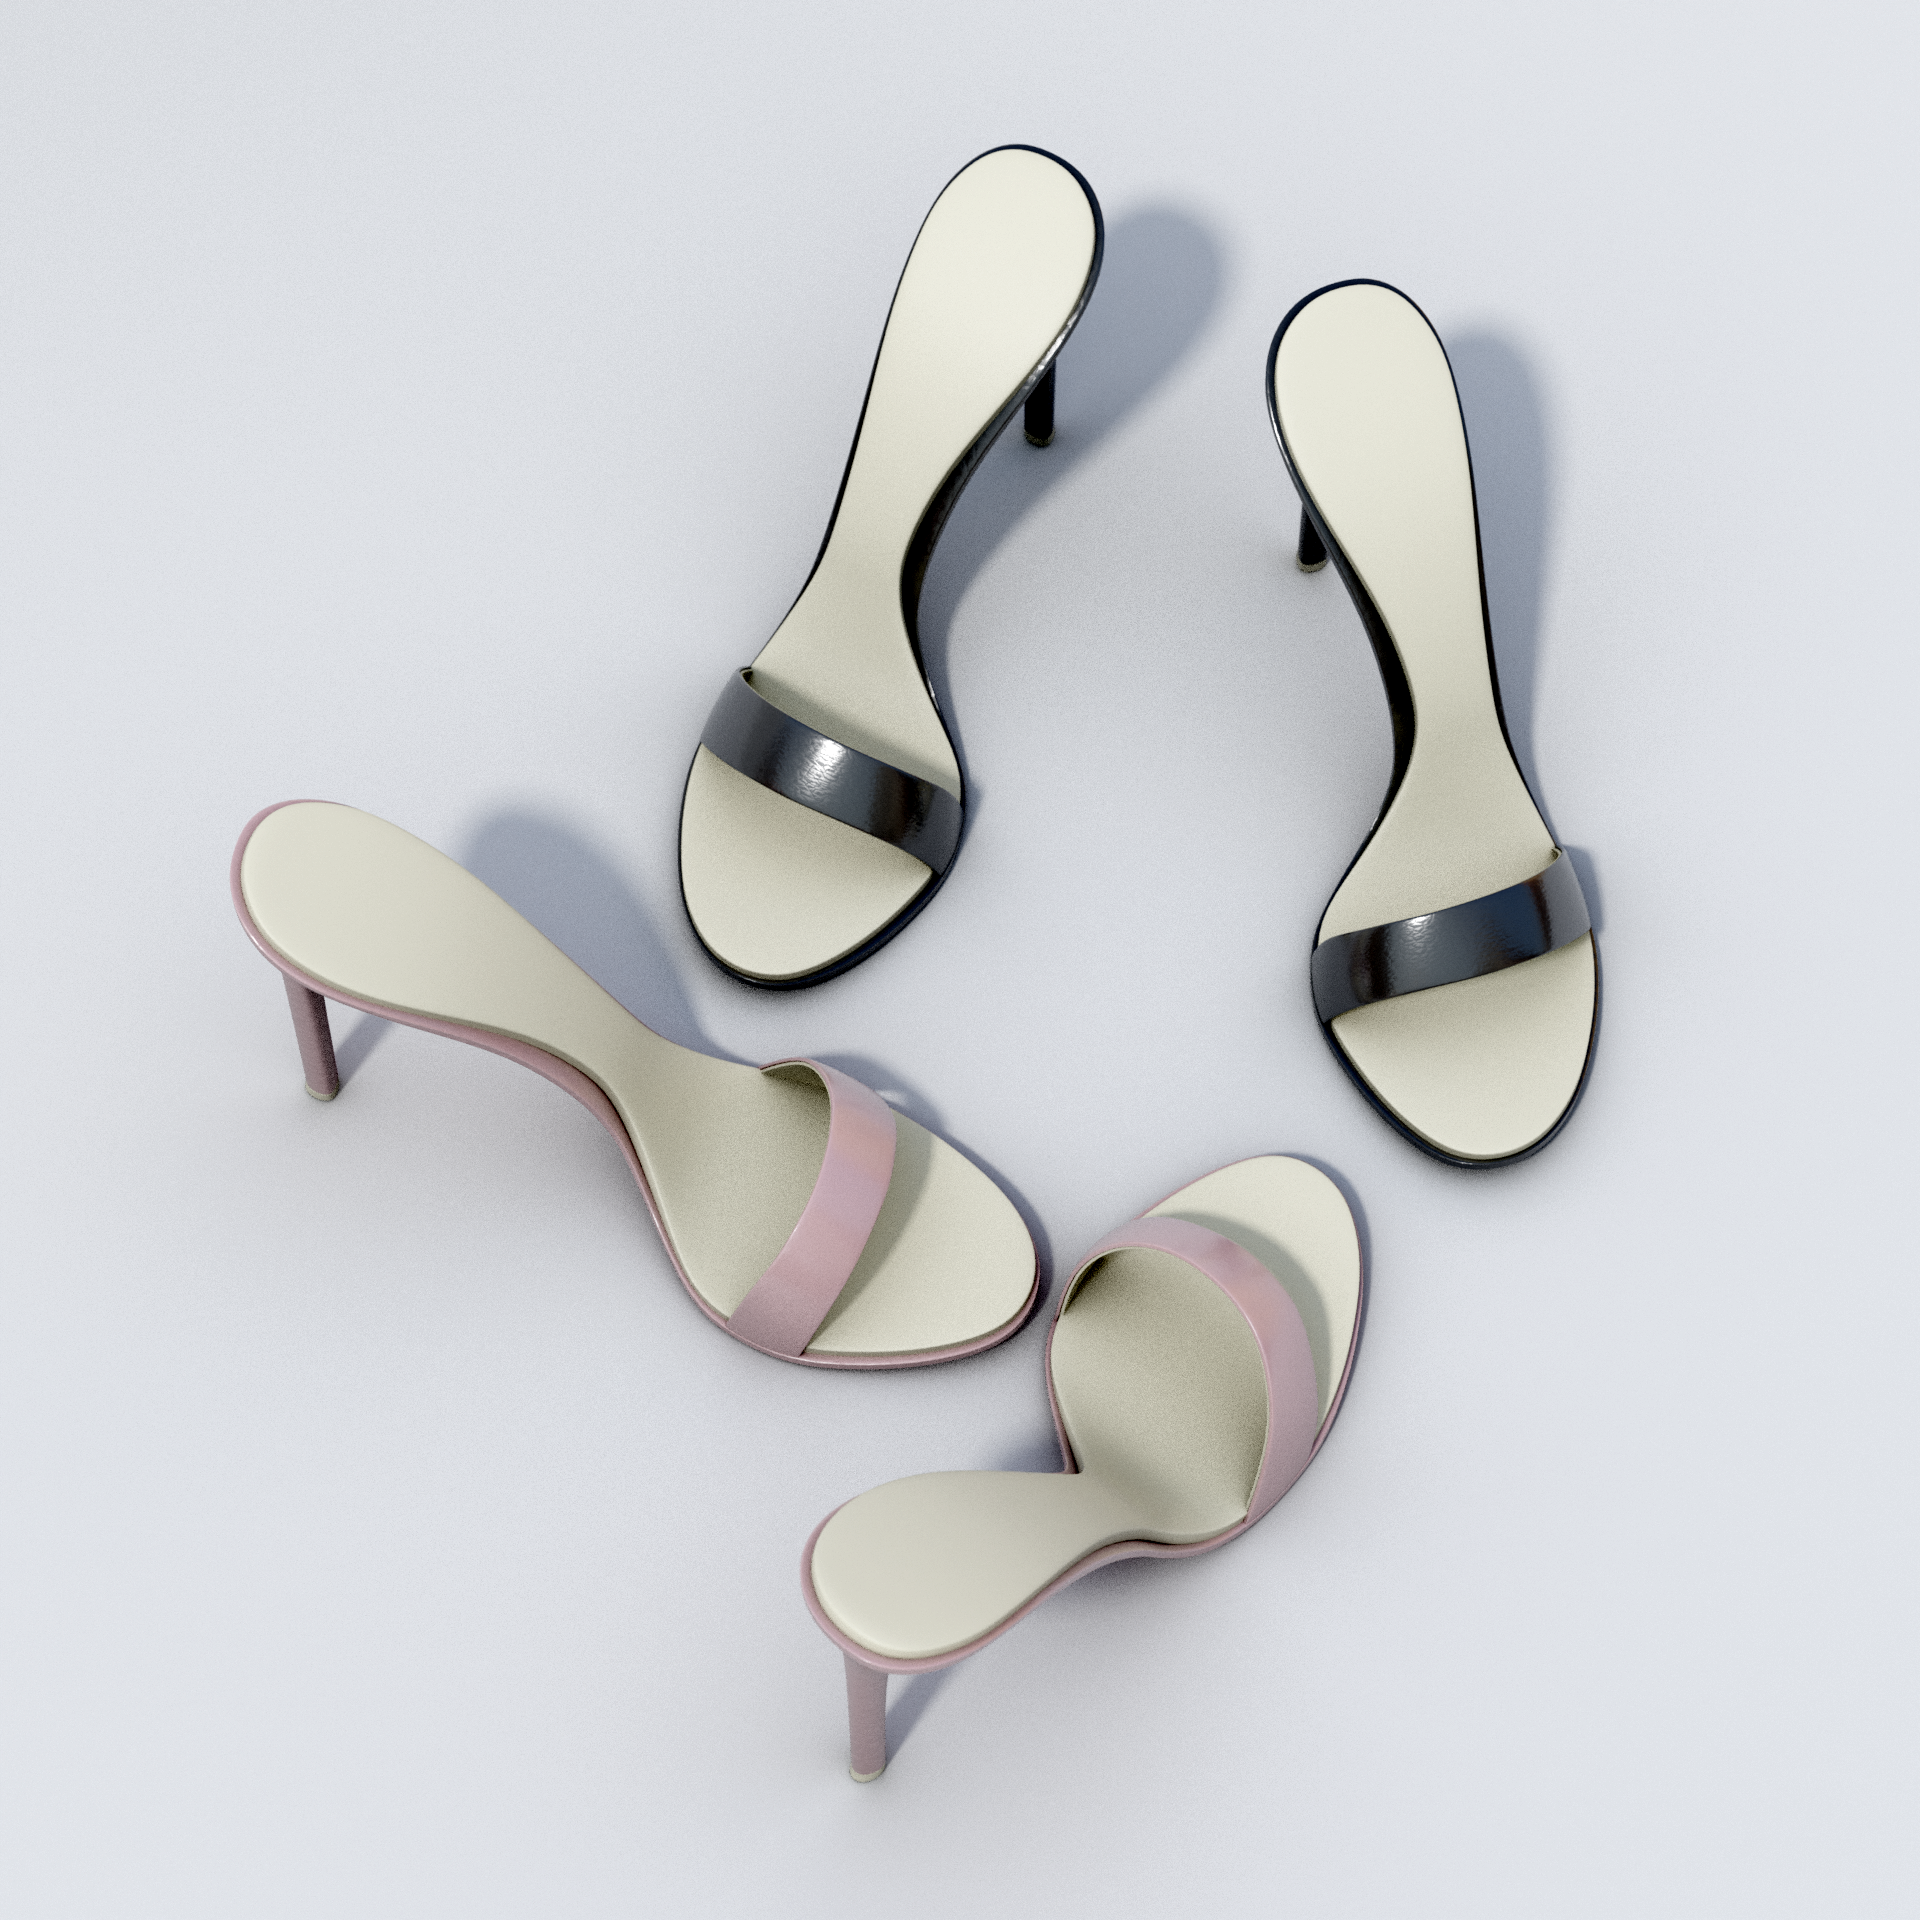 Female High Heel Sandals preview image 2